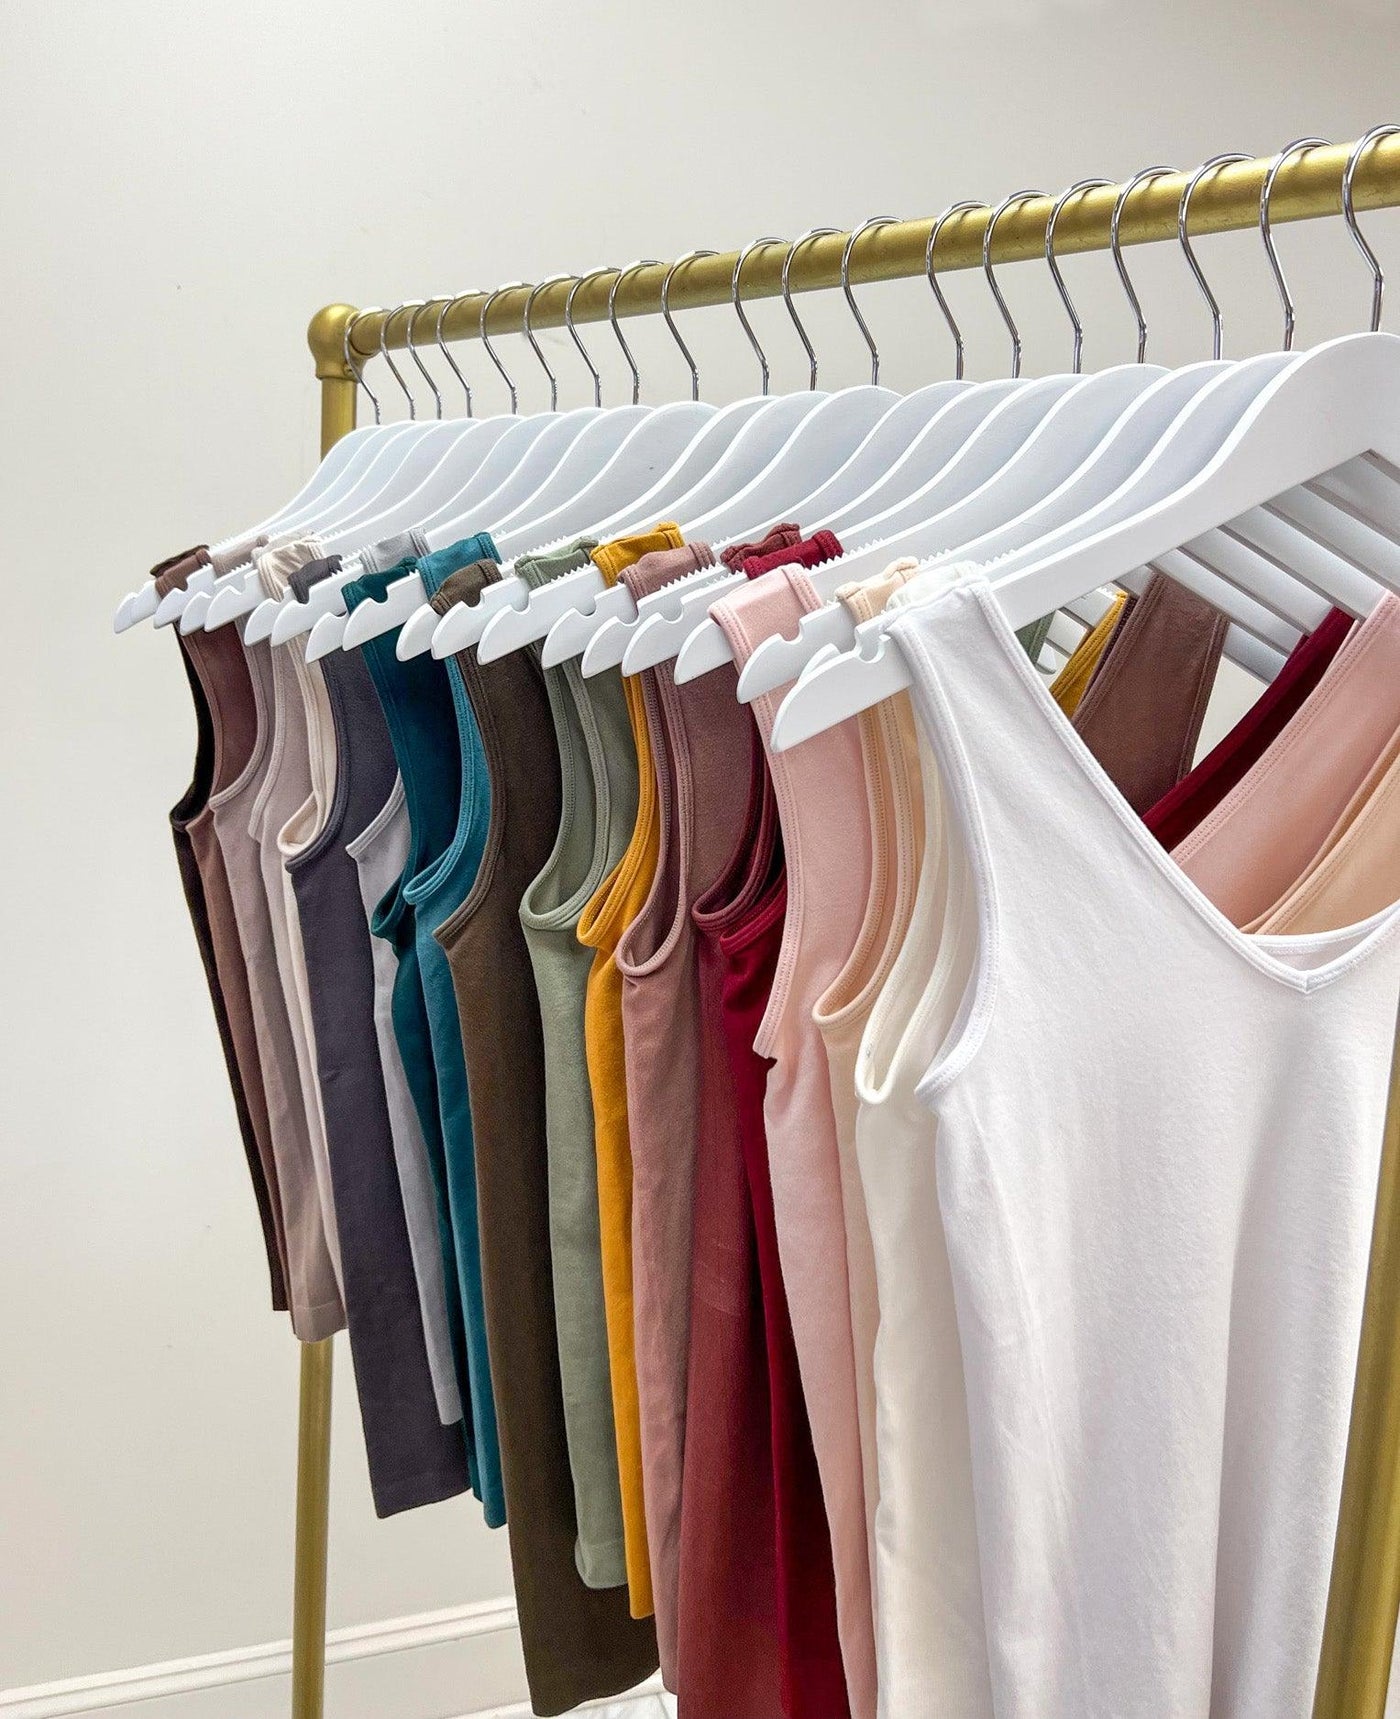 Allcolor ways of the reversible tanks tops at Fruit of the Vine